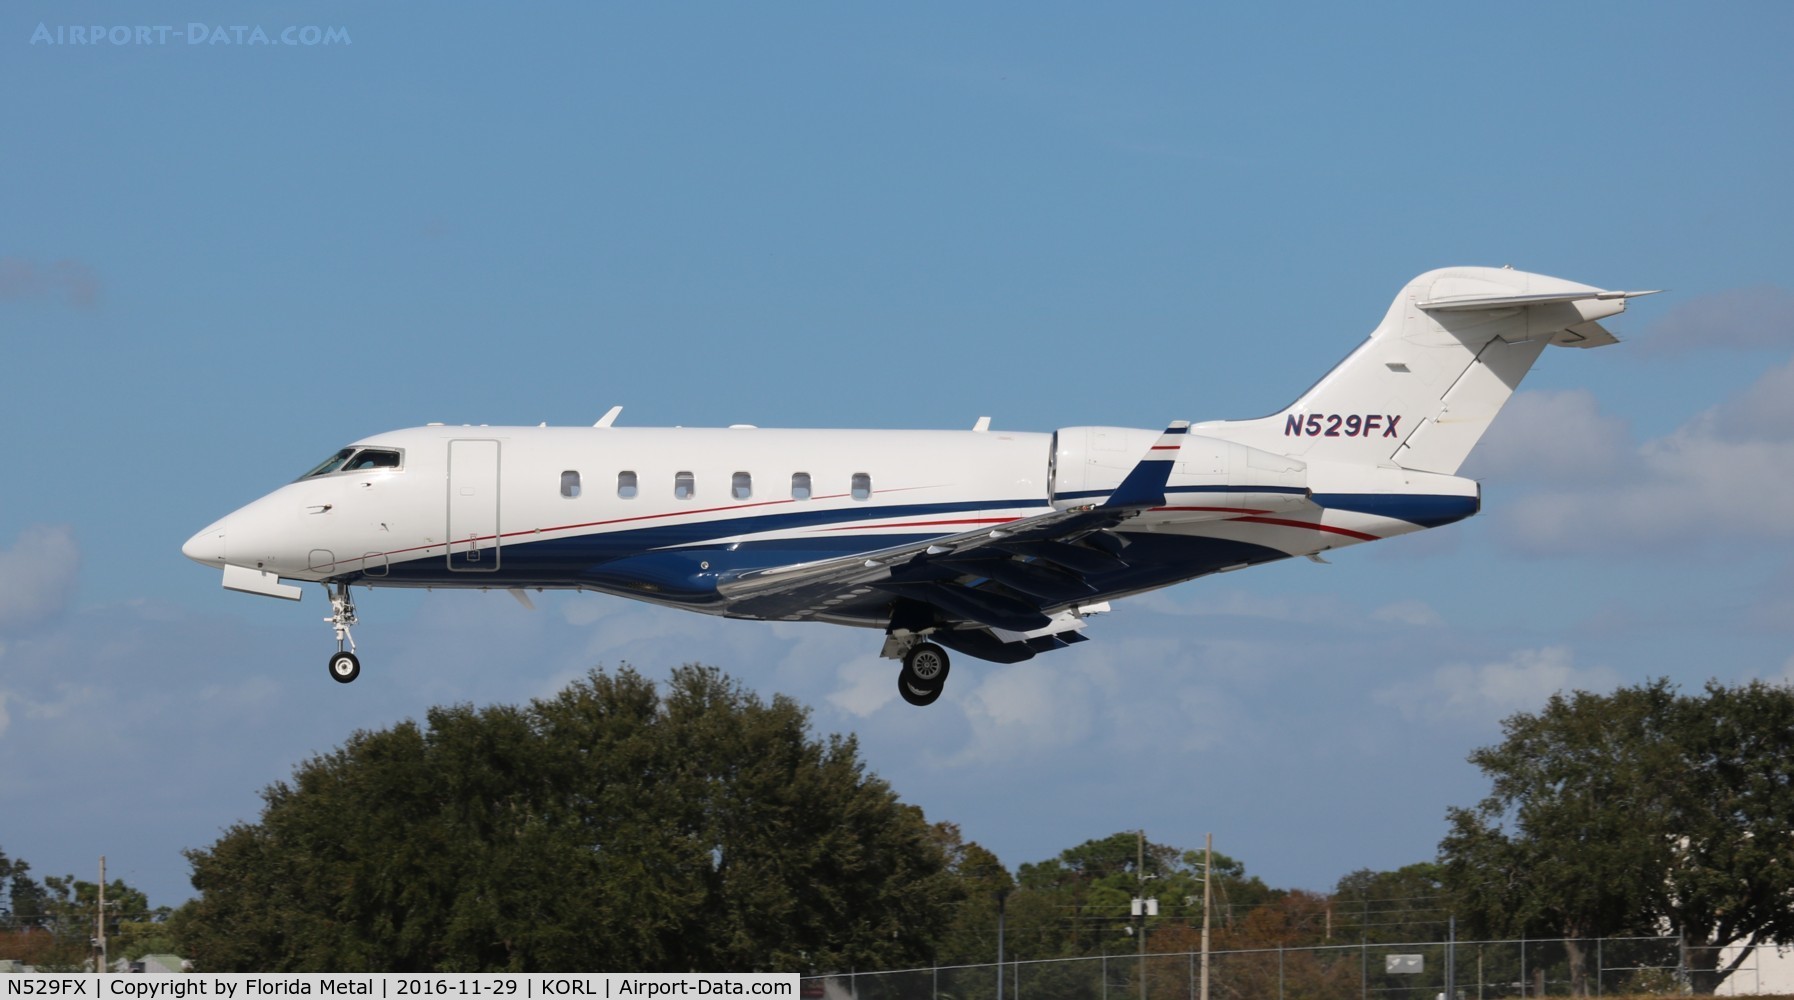 N529FX, 2006 Bombardier Challenger 300 (BD-100-1A10) C/N 20128, Challenger 300 zx